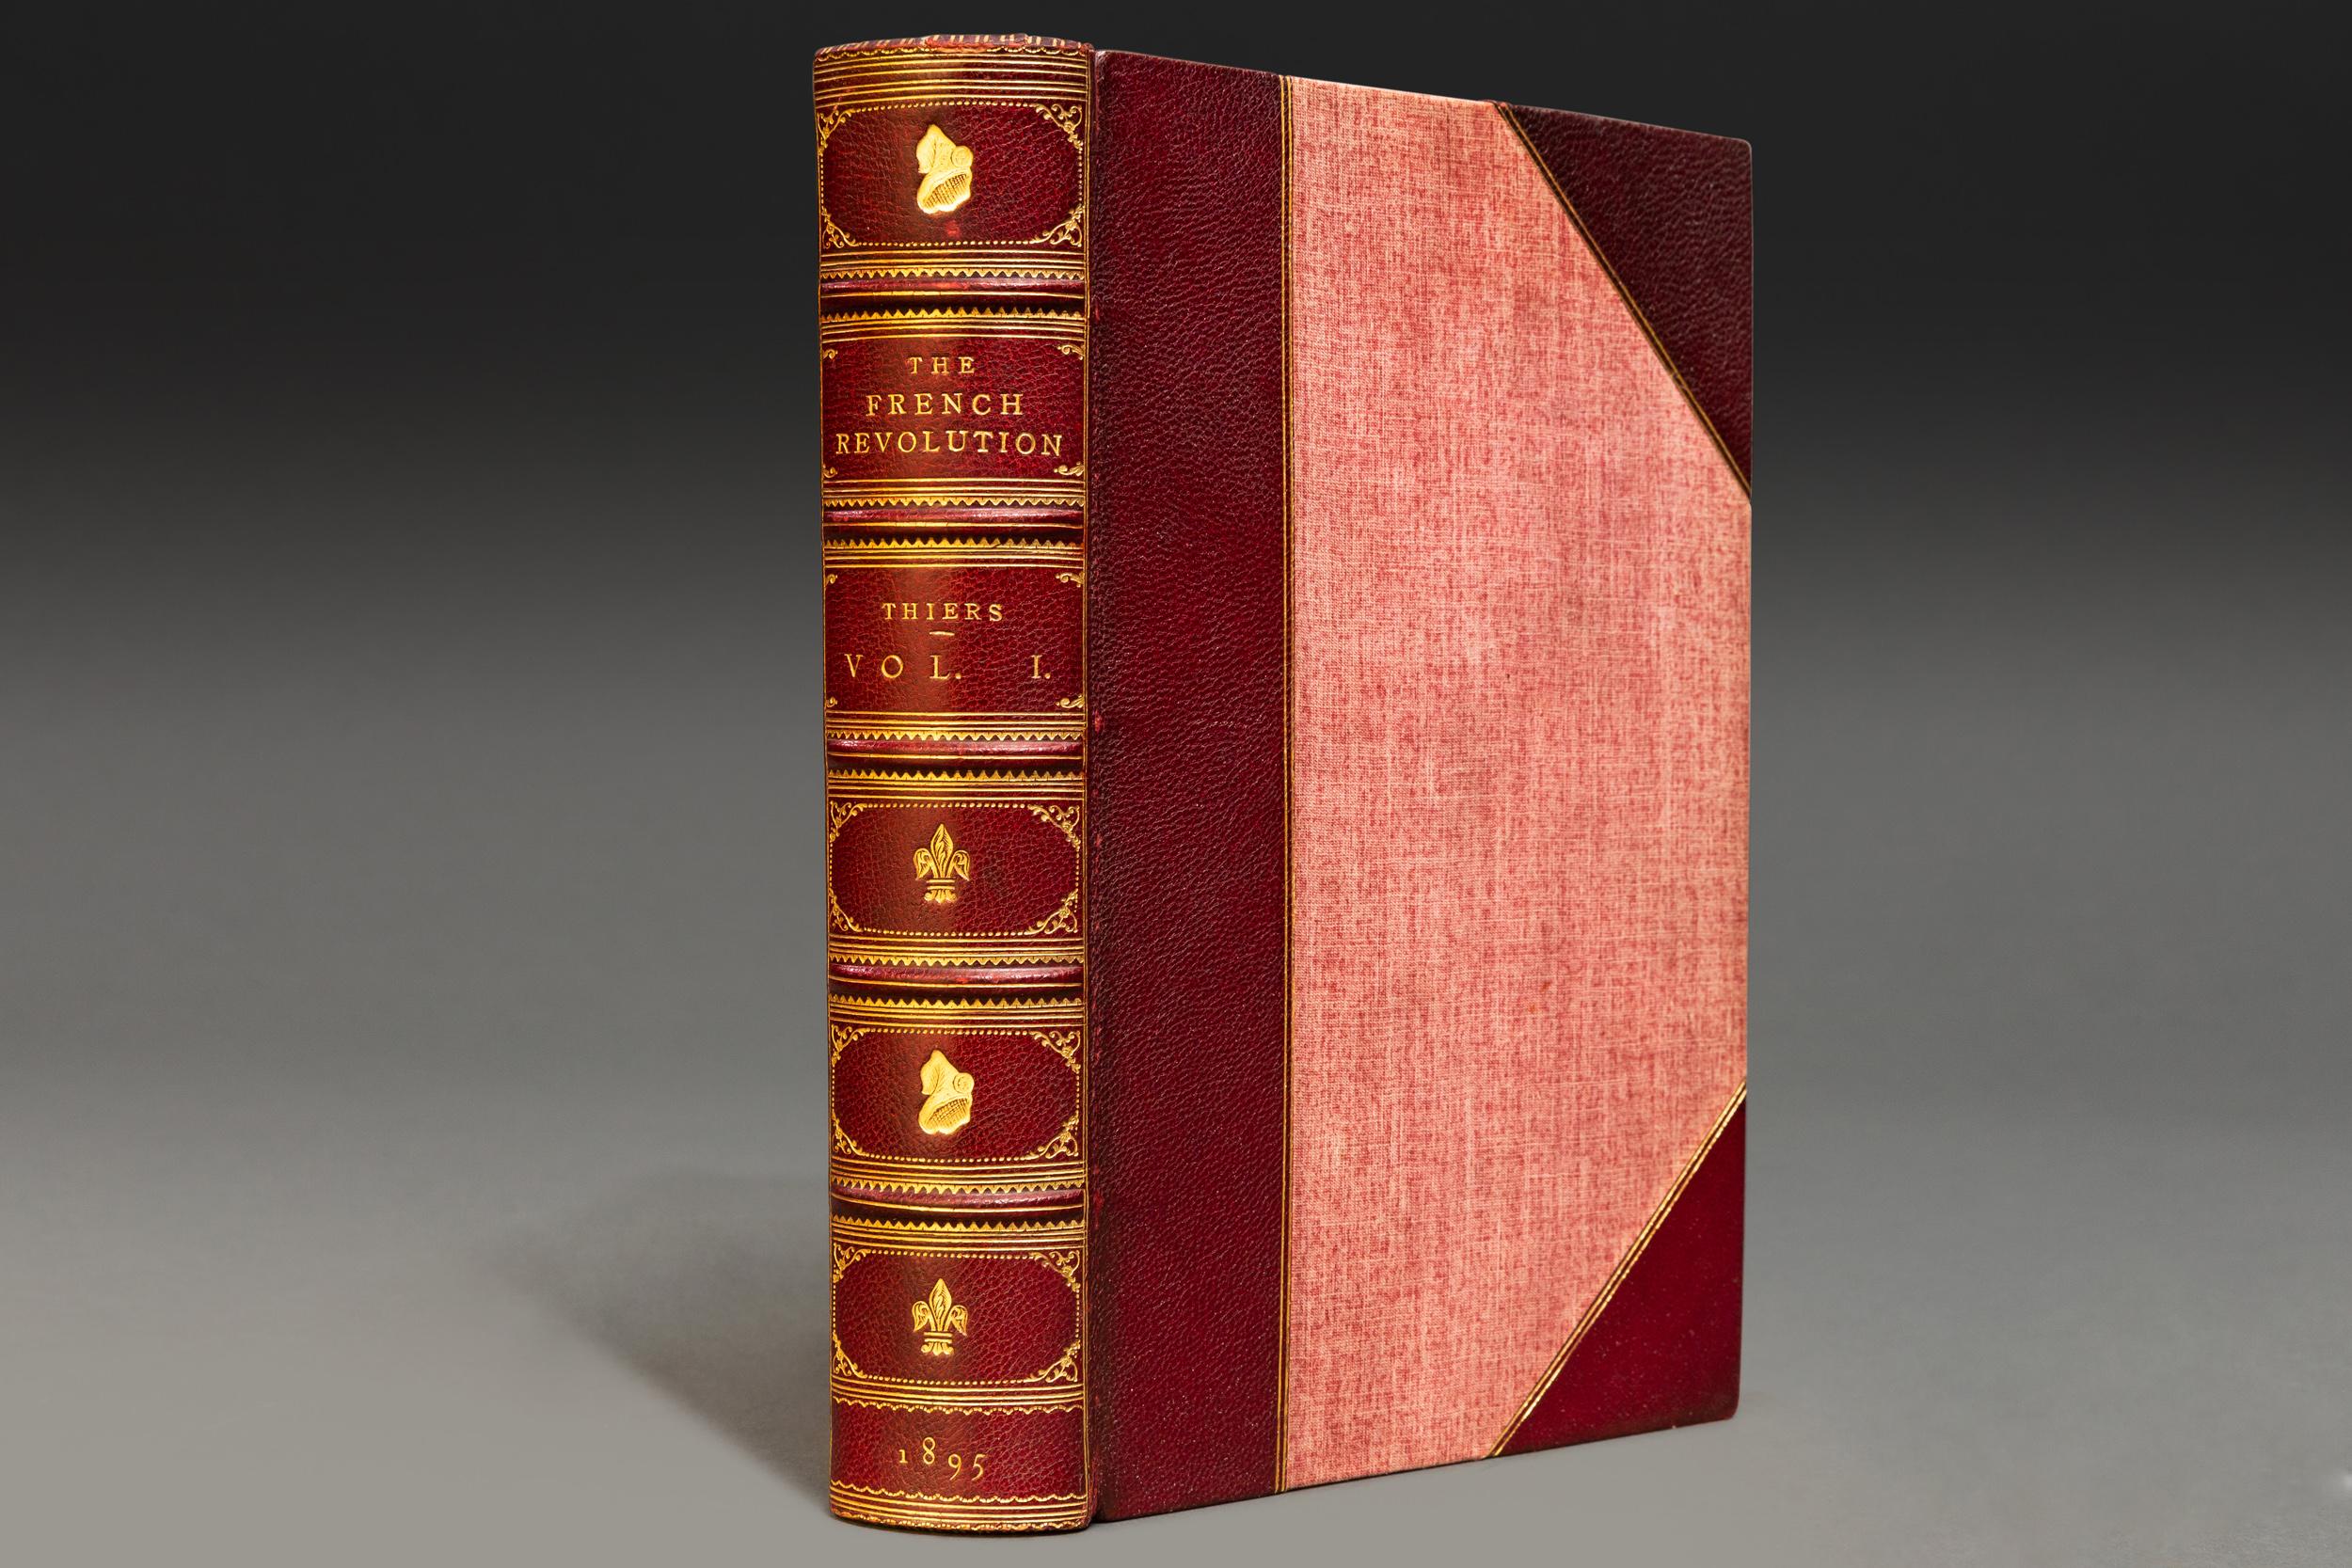 5 volumes. Louis A. Thiers. The History of The French Revolution (1789-1800). Translated with notes & illustrations from the most authentic sources by Frederick Schobert. Bound in 3/4 wine morocco by Morrell linen boards. Marbled endpapers. Raised